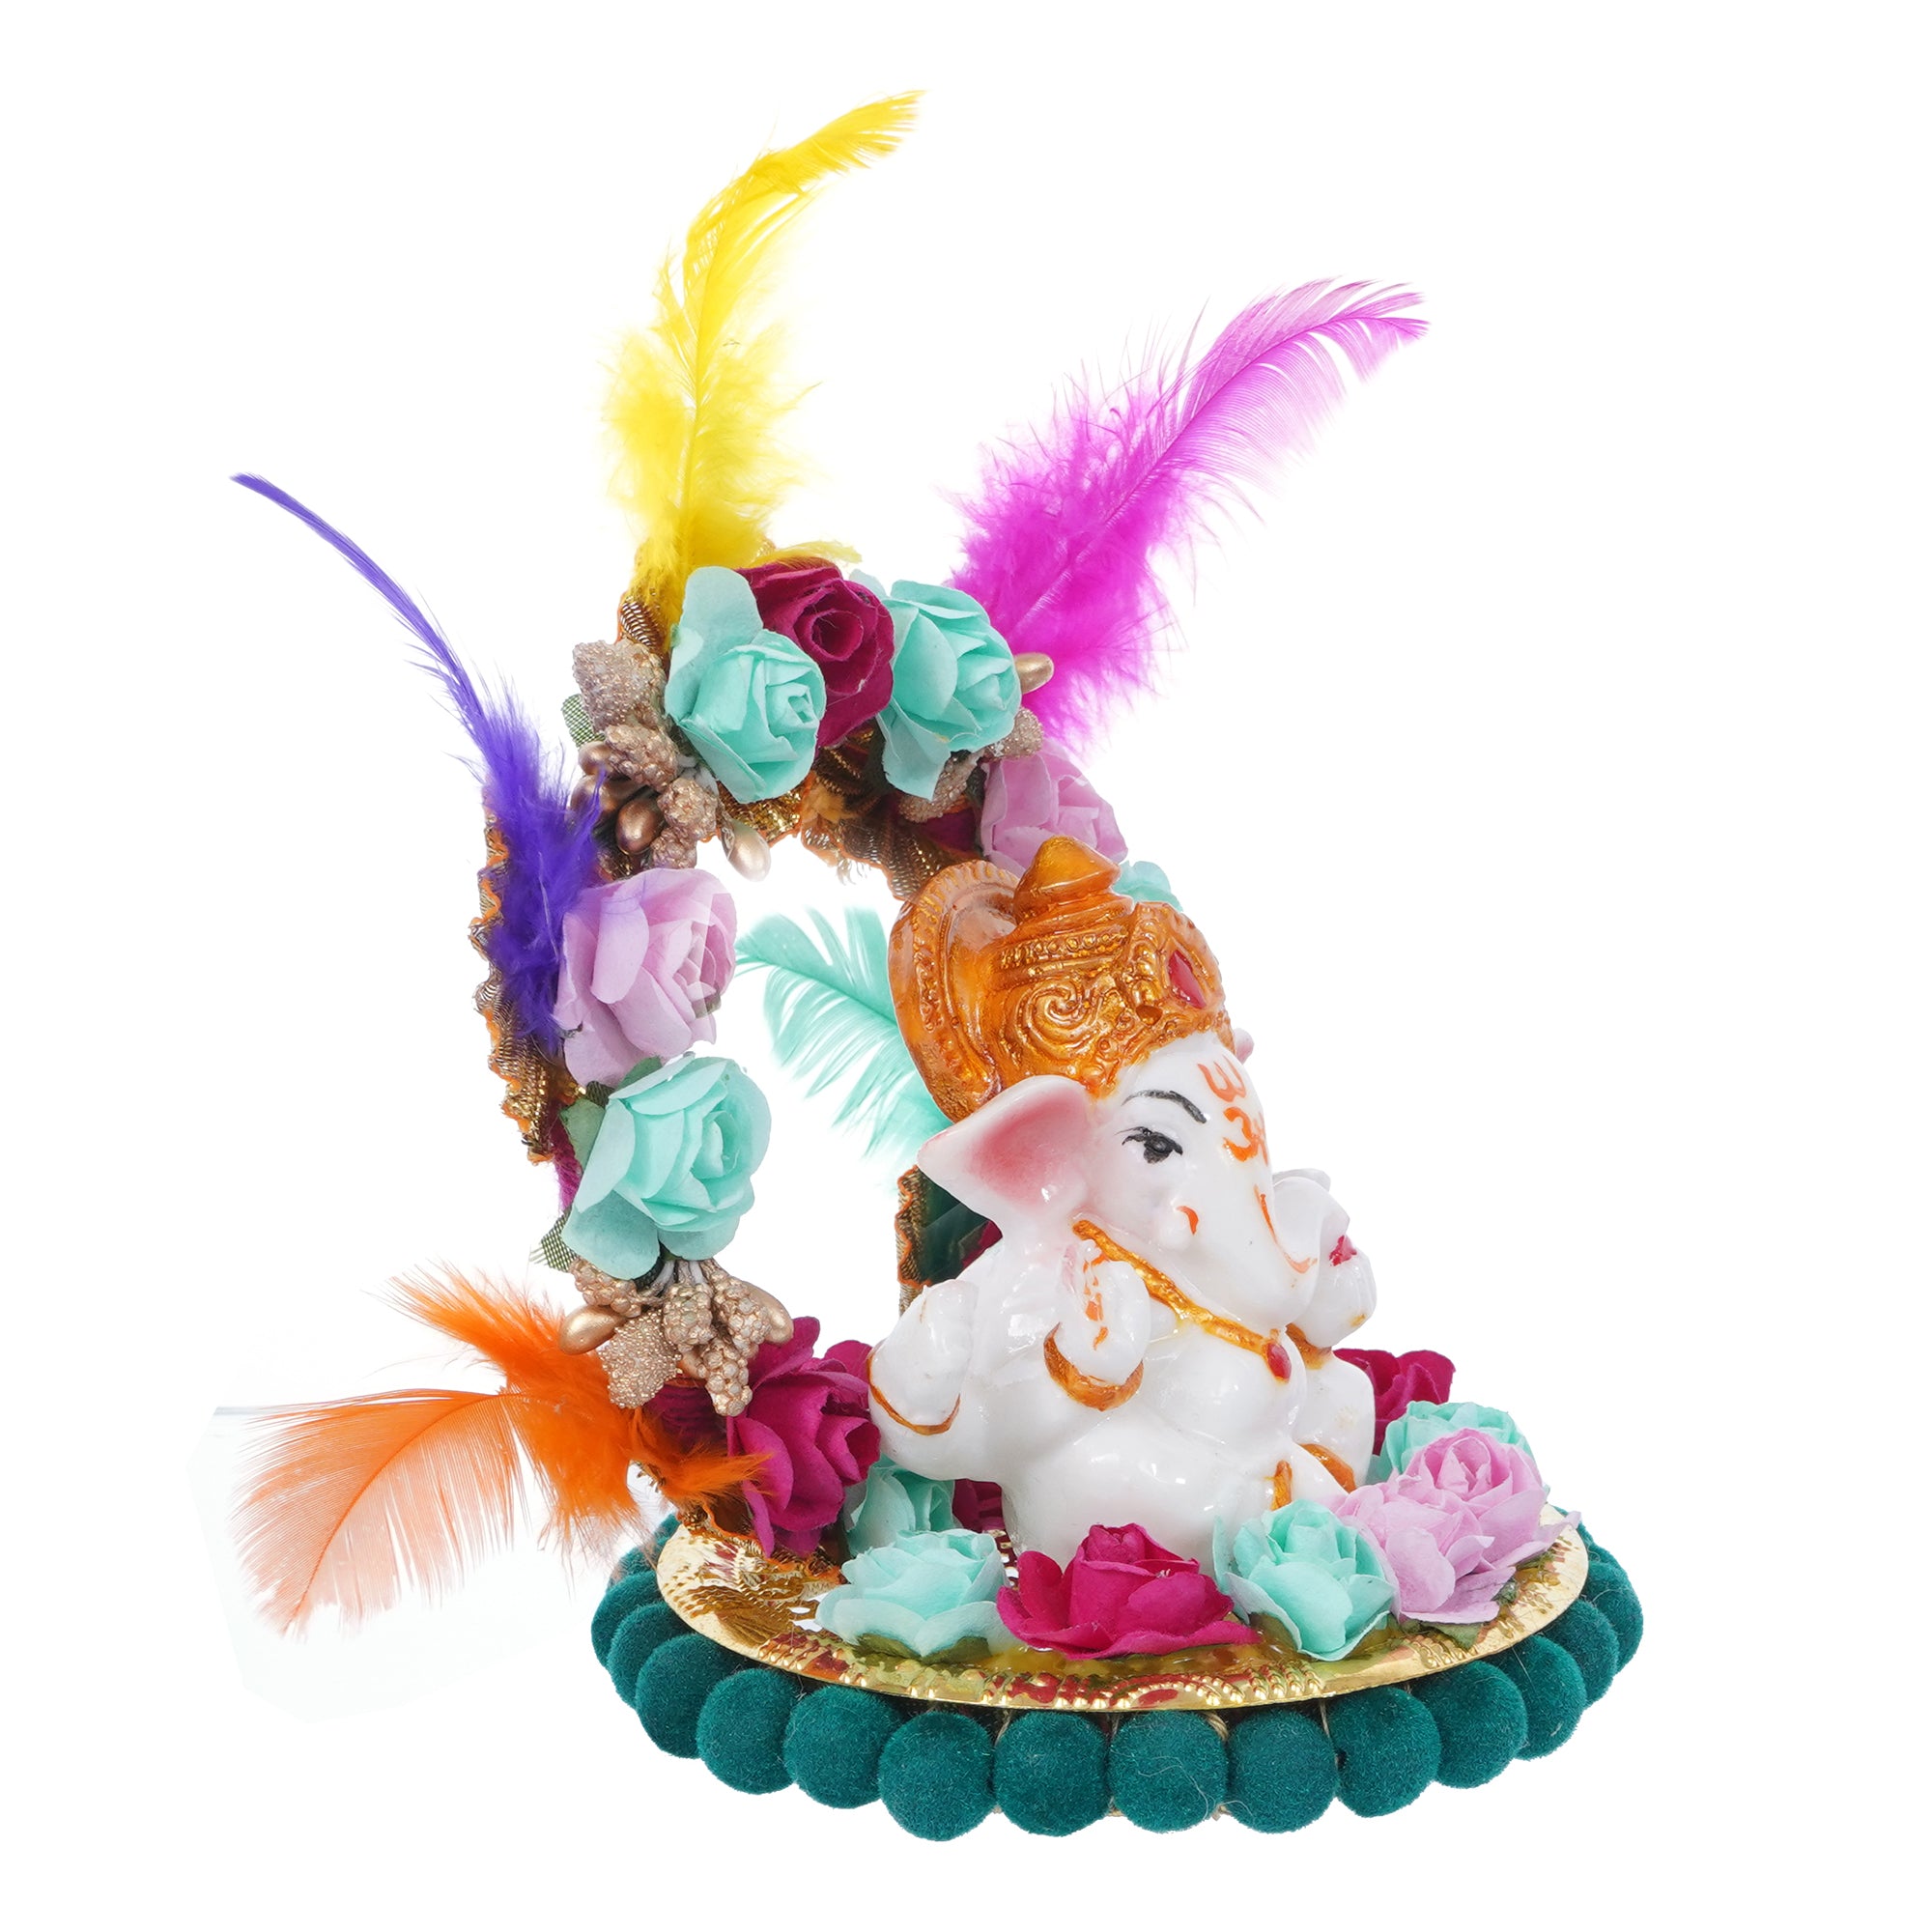 Lord Ganesha Idol On Decorative Handcrafted Plate With Throne Of Colorful Flowers And Feathers 4